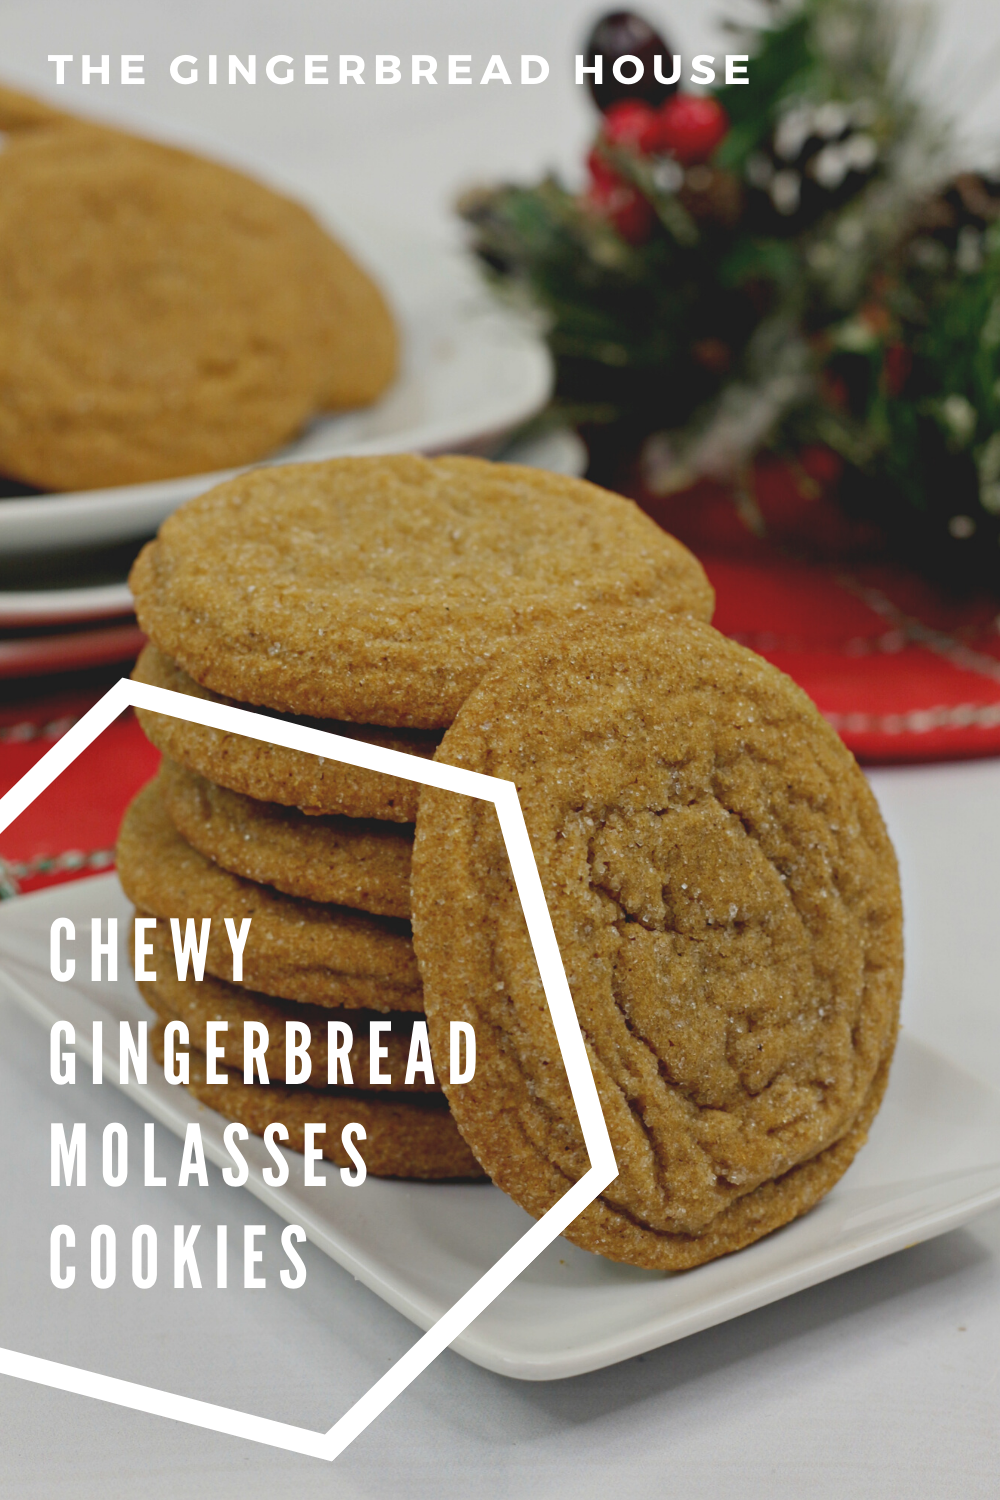 Chewy Molasses Gingerbread Cookies Recipe